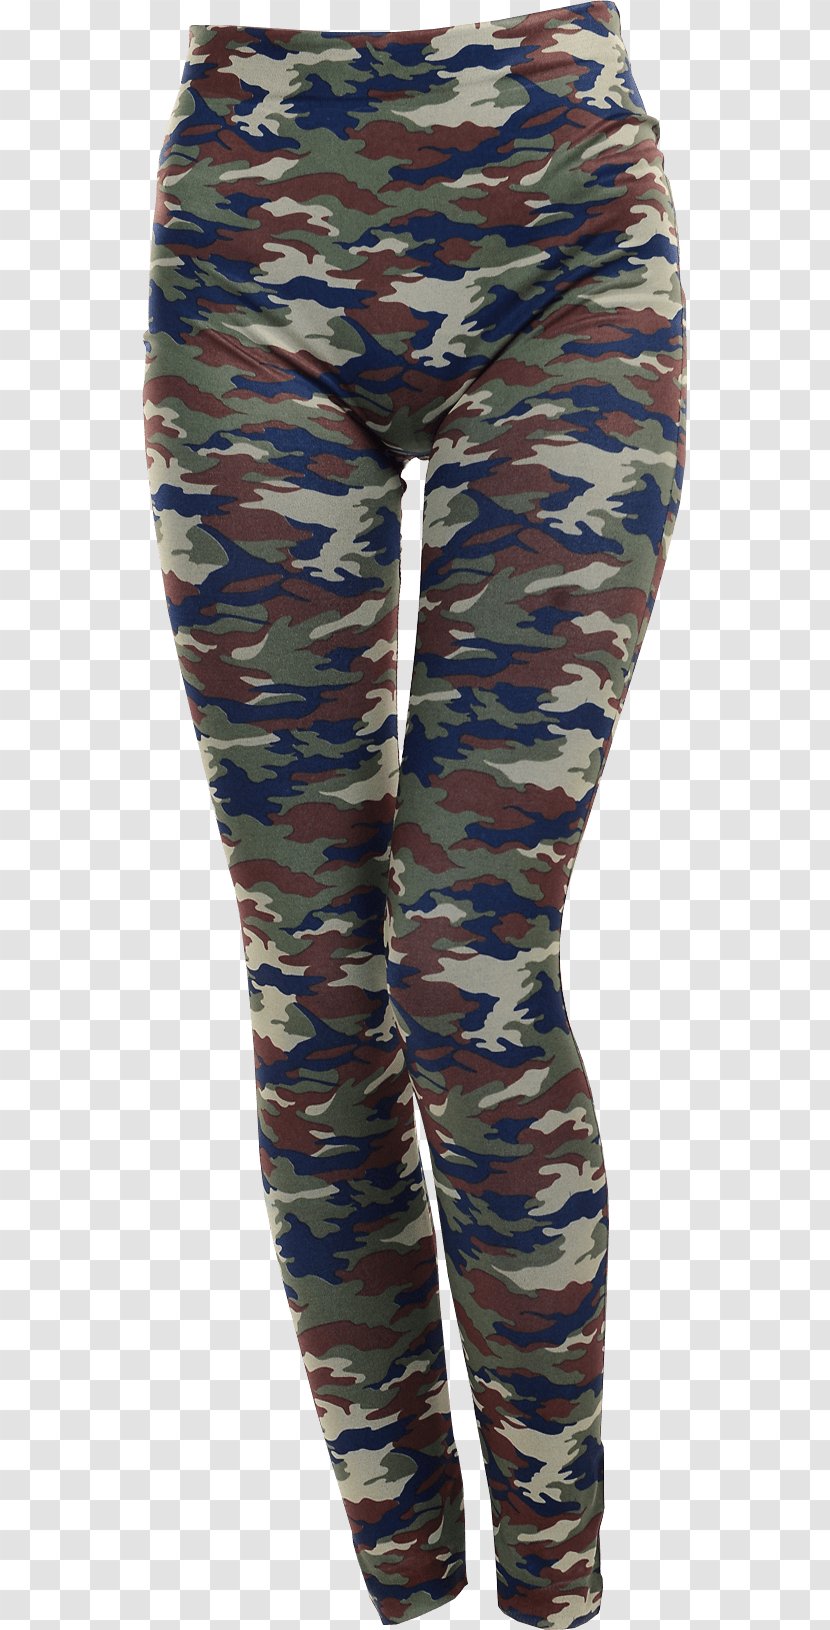 Leggings Military Camouflage Yoga Pants Jeggings - Trousers - CAMOUFLAGE Transparent PNG